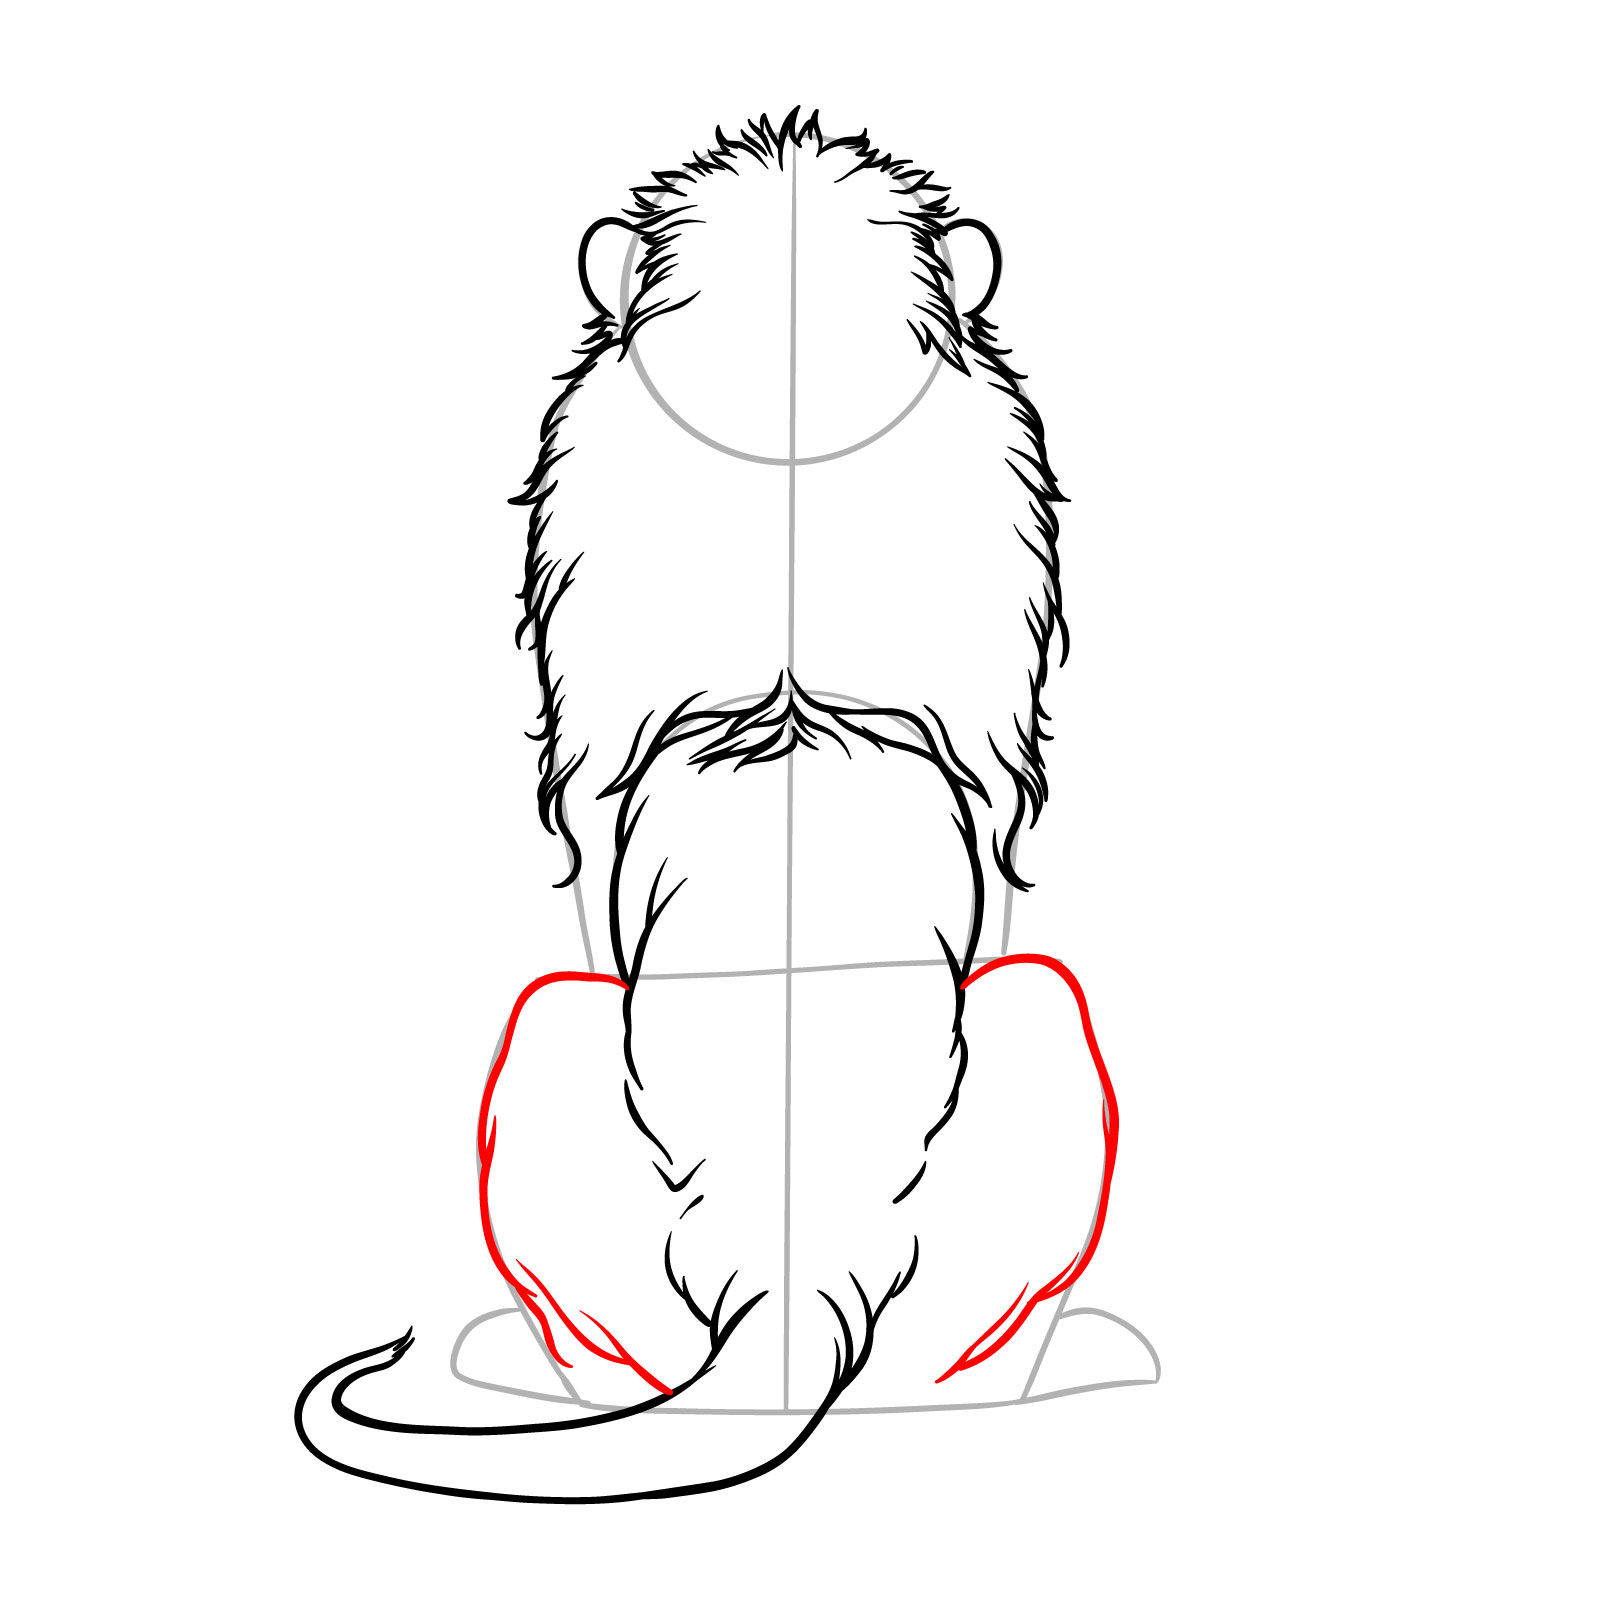 Step 8 in the guide for drawing a sitting lion from the back view, outlining rear legs to the joints